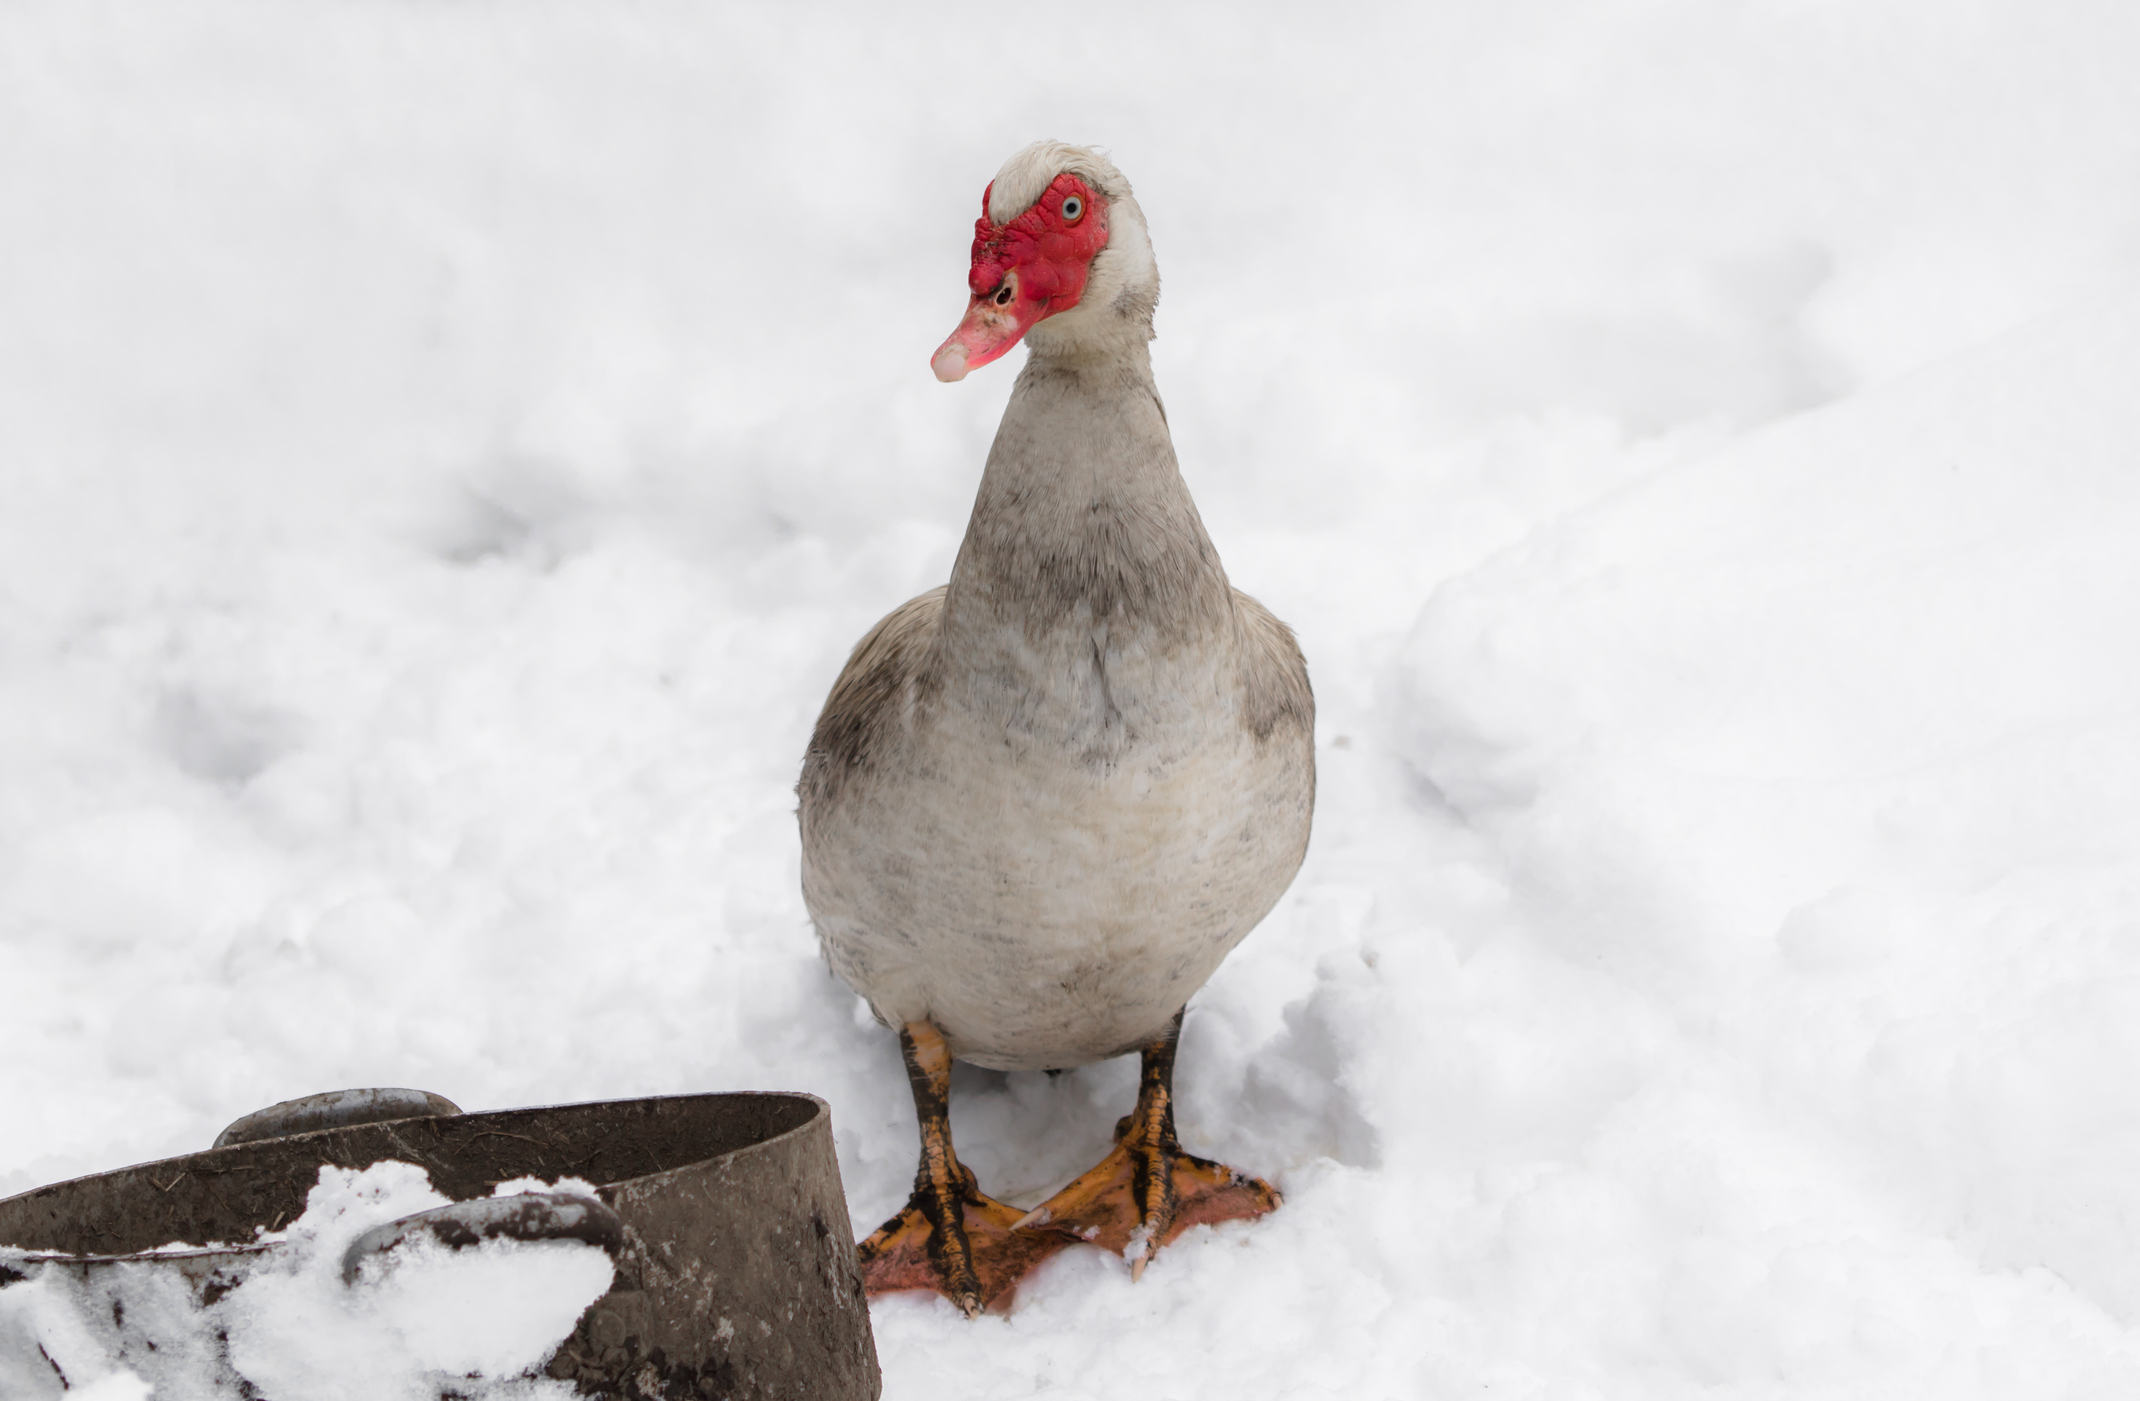 What To Feed Ducks In The Winter?